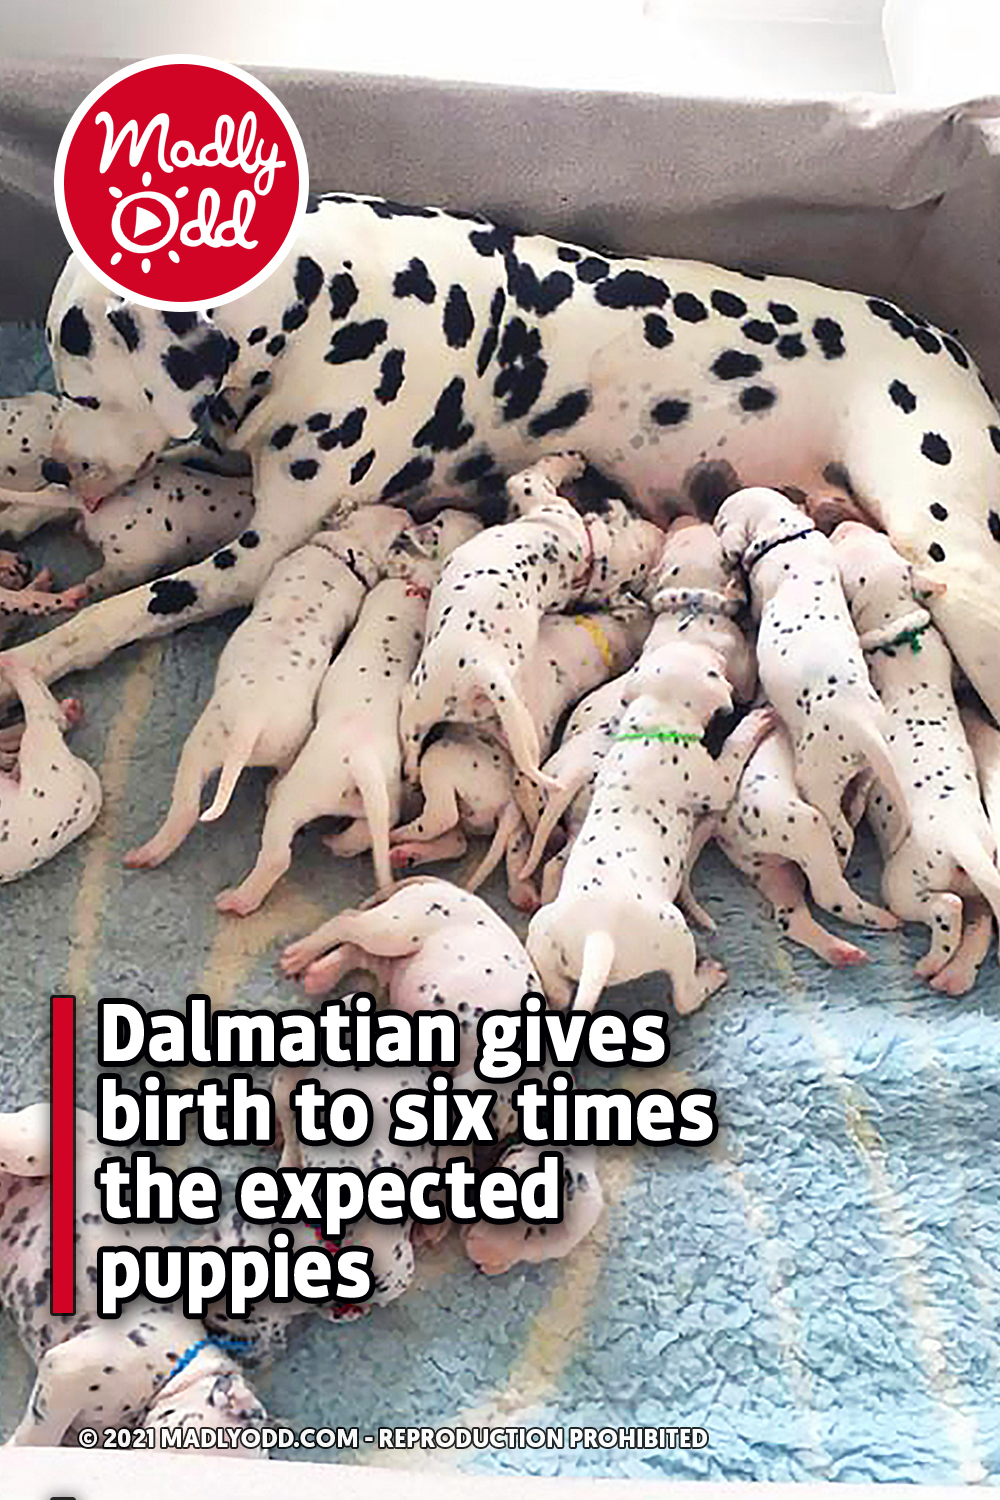 Dalmatian gives birth to six times the expected puppies